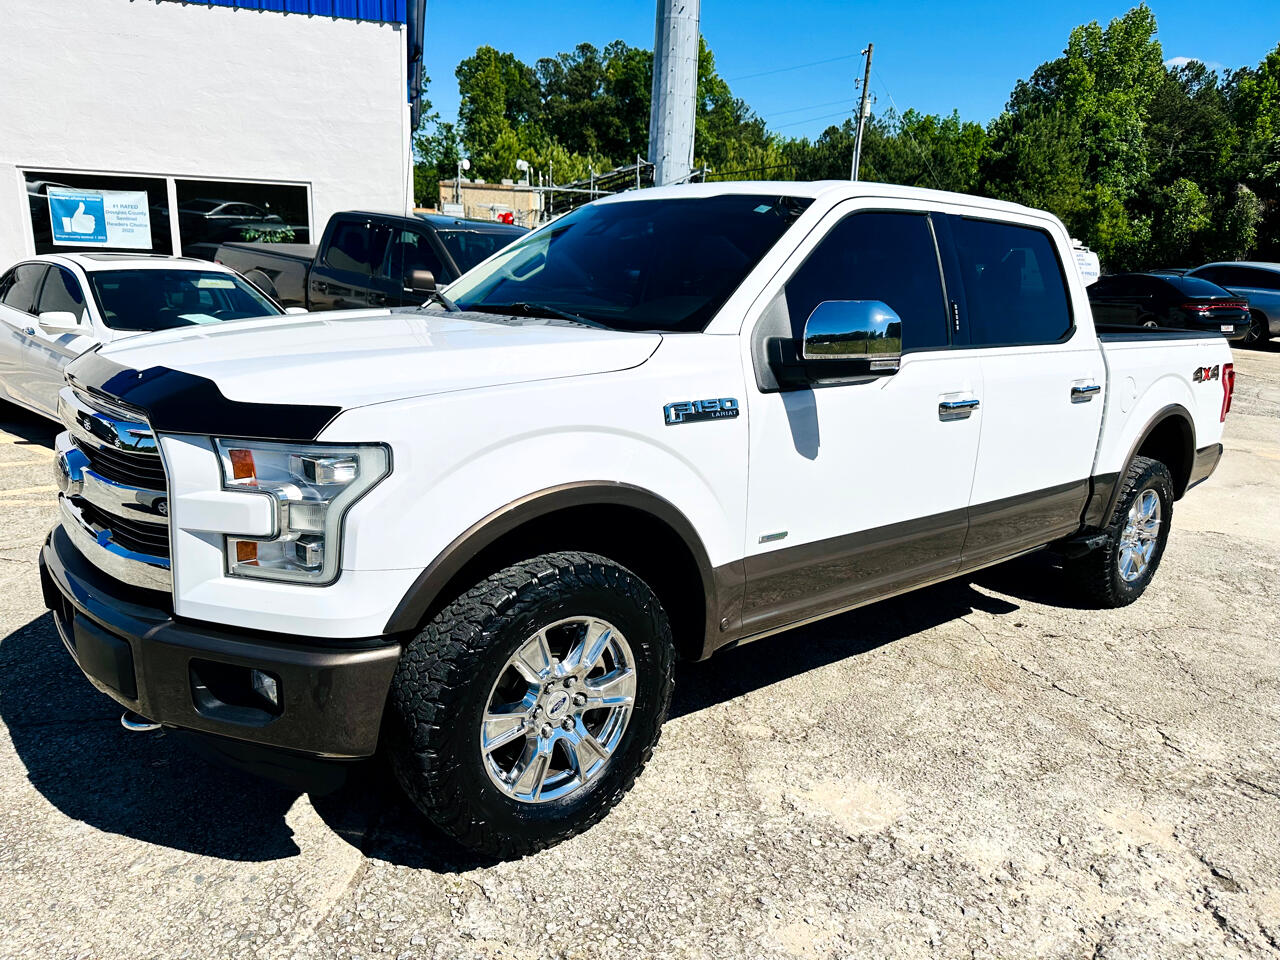 2015 Ford F-150 Lariat SuperCrew 5.5-ft. Bed 4WD